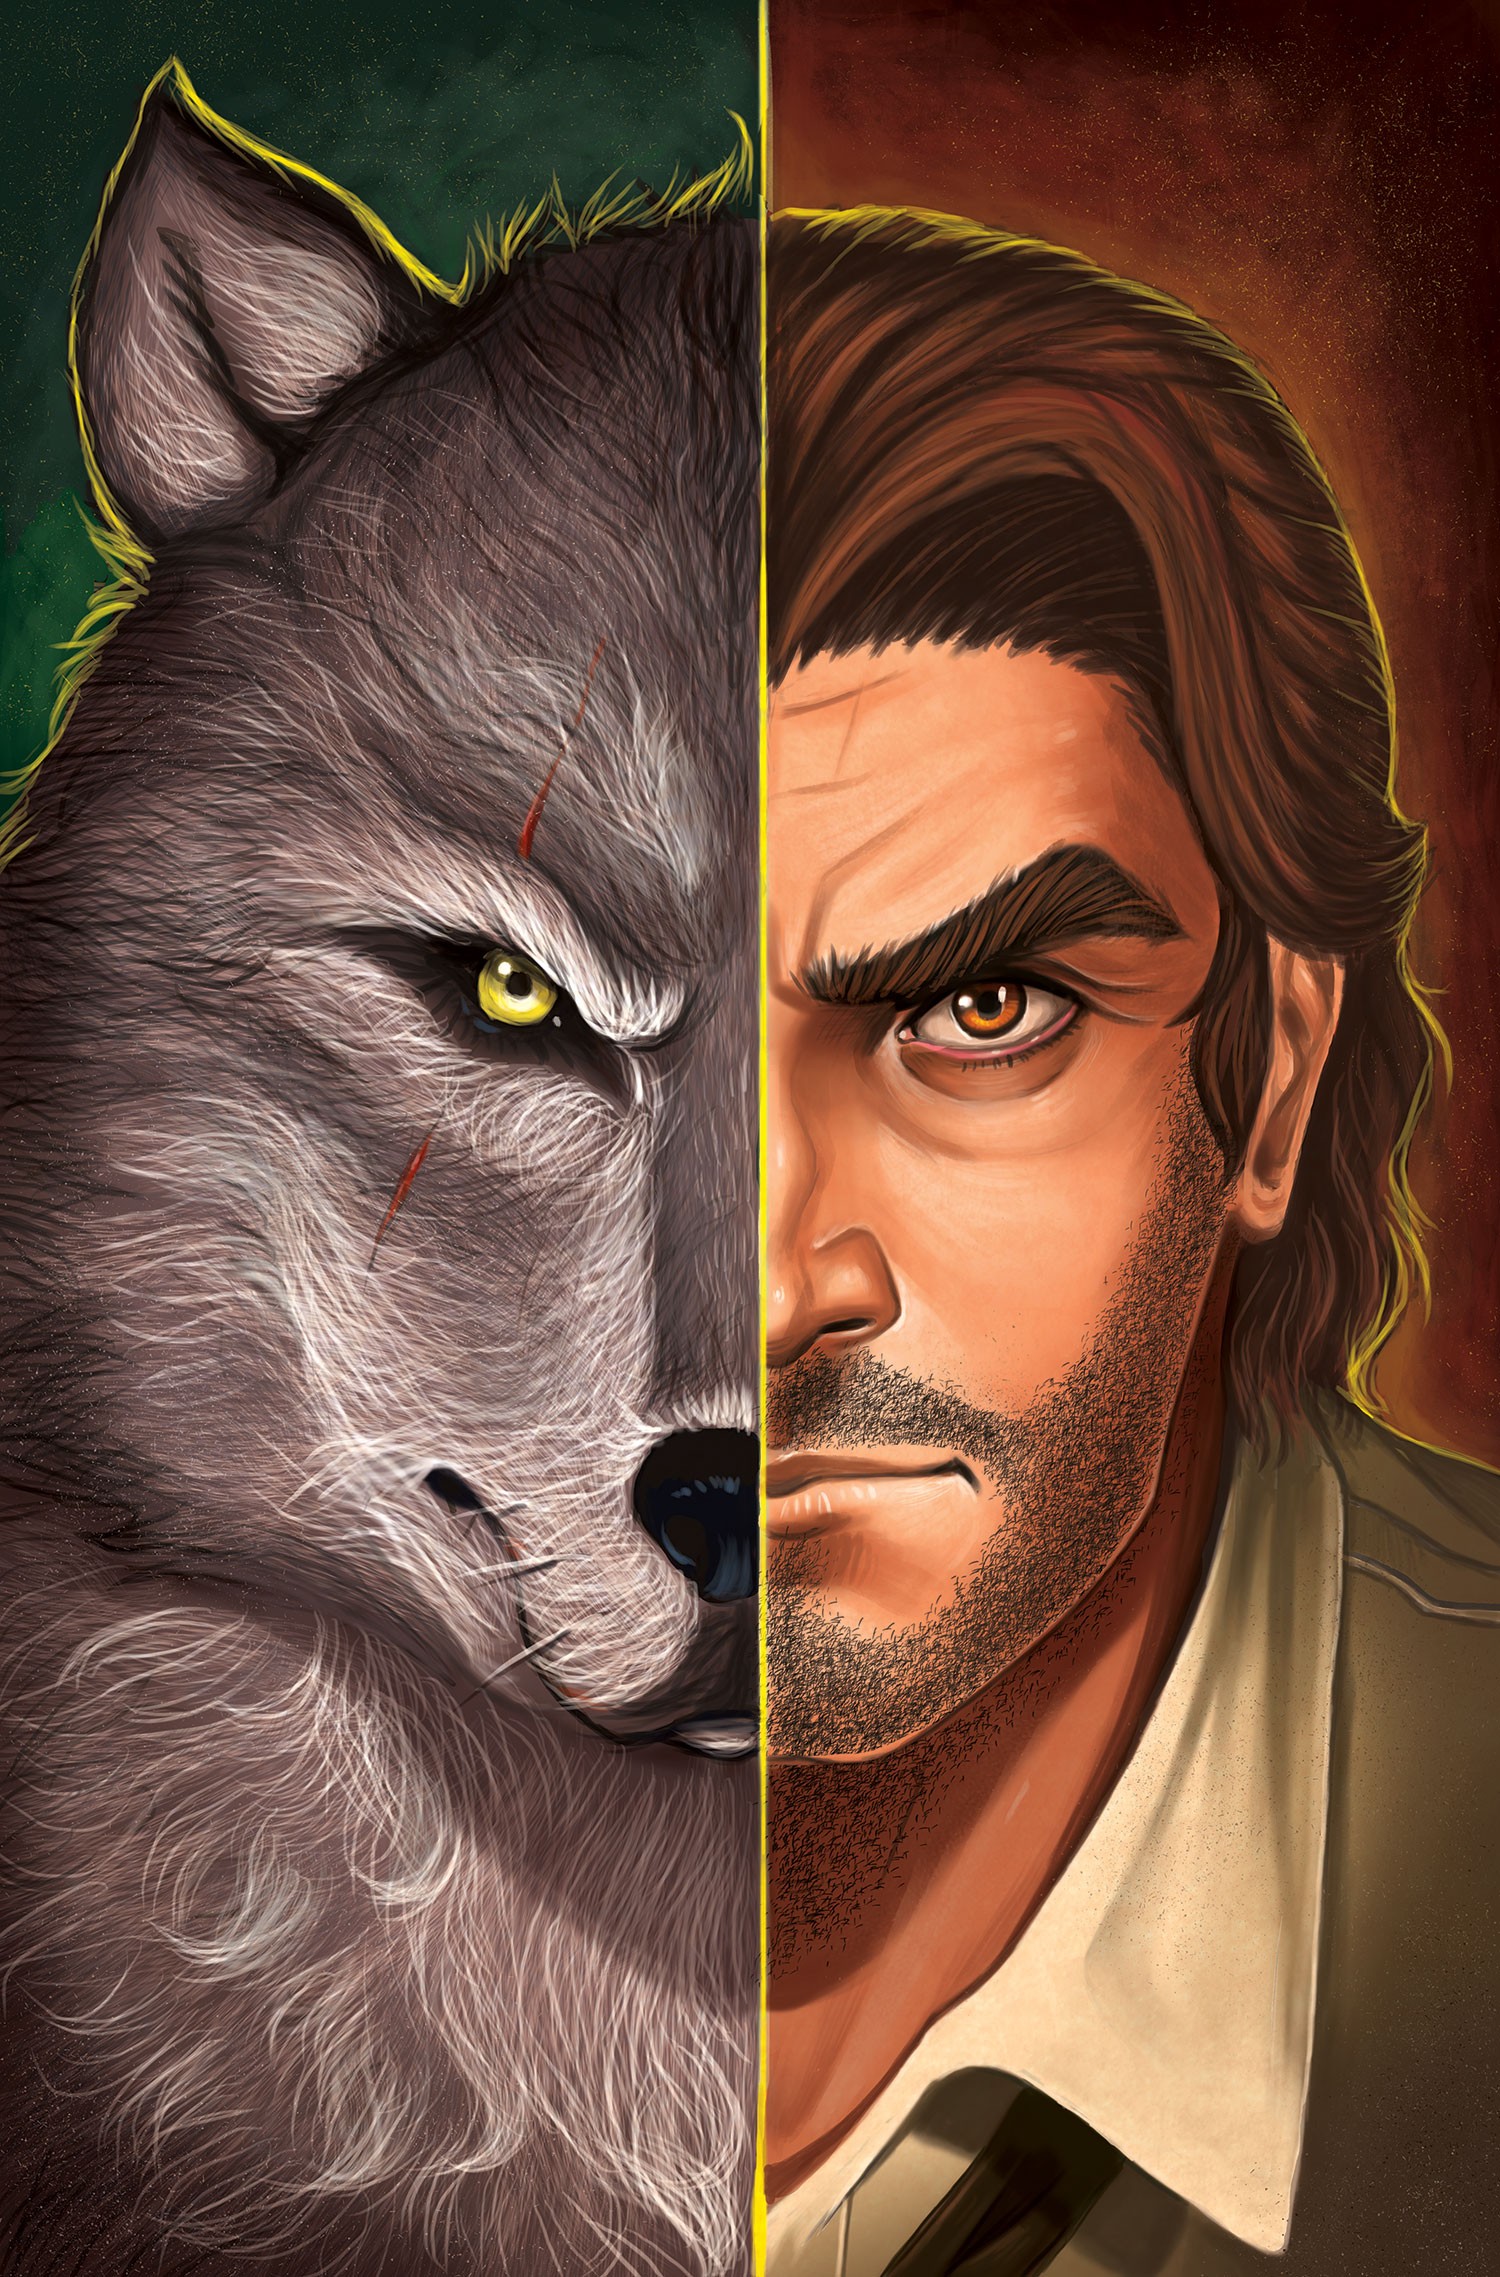 Fables: The Wolf Among Us Vol. 1 #4